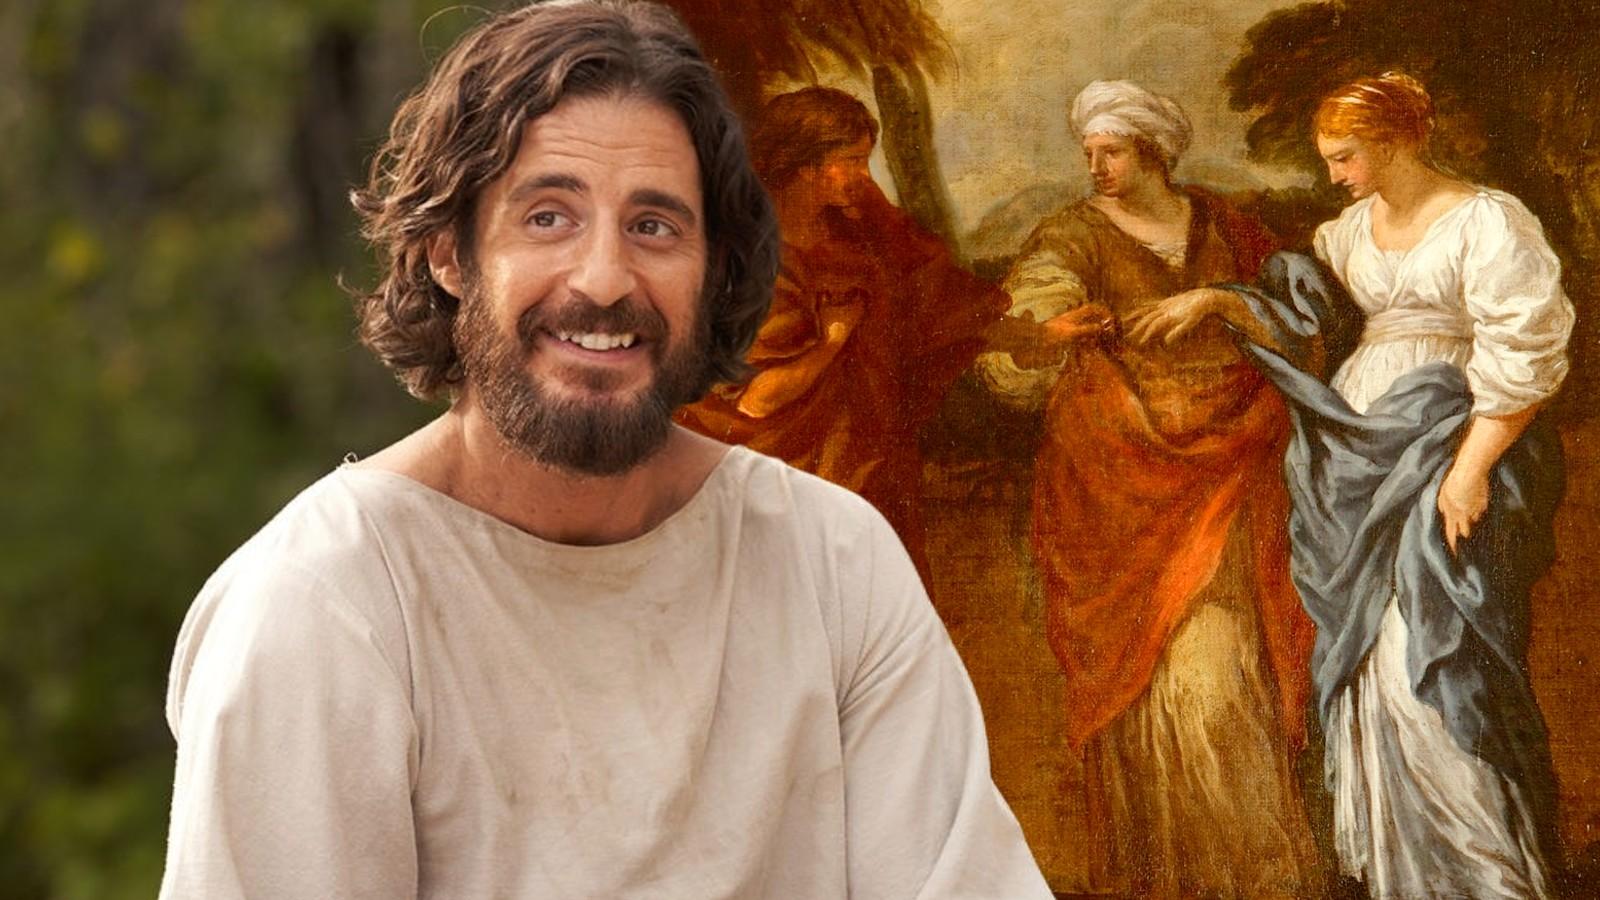 Jonathan Roumie as Jesus in The Chosen and a painting of Ruth and Boaz